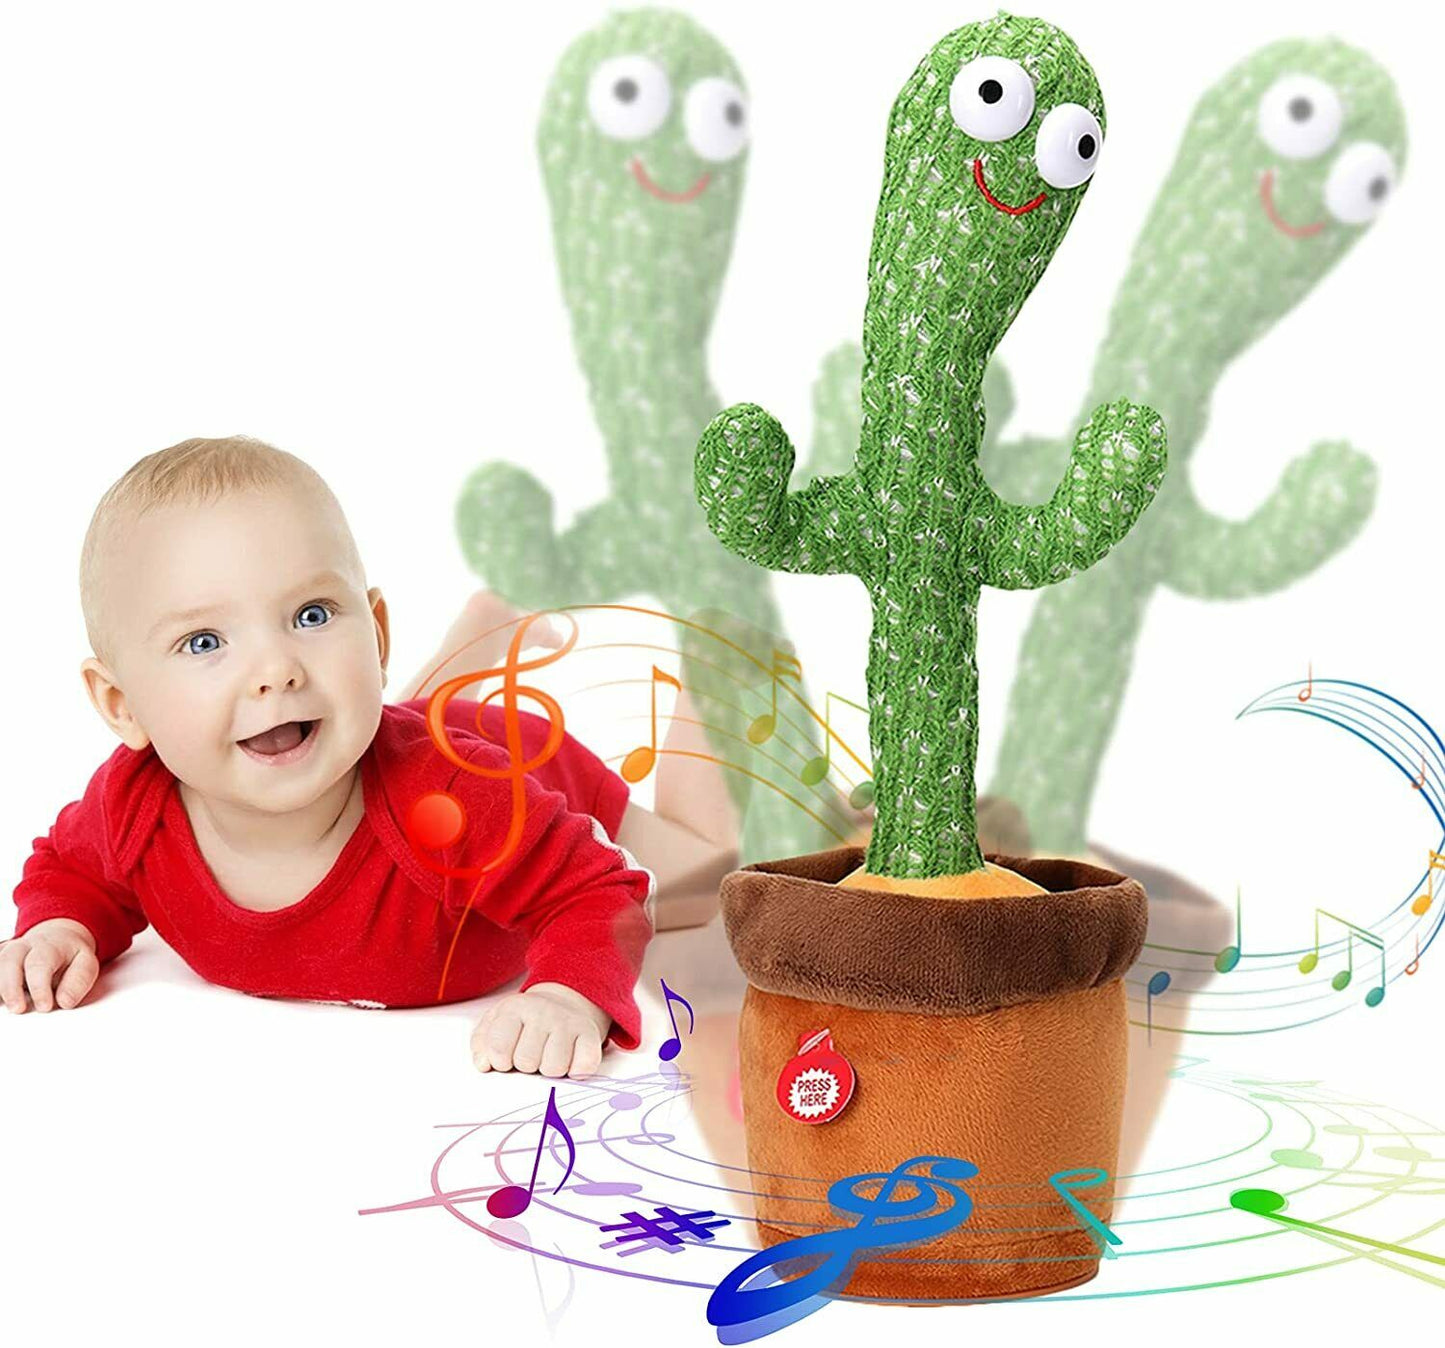 Dancing Cactus Repeat Talking Toy Song Speaker Wriggle Dancing Sing Toy Talk Plushie Stuffed Toys For Baby Adult Toys